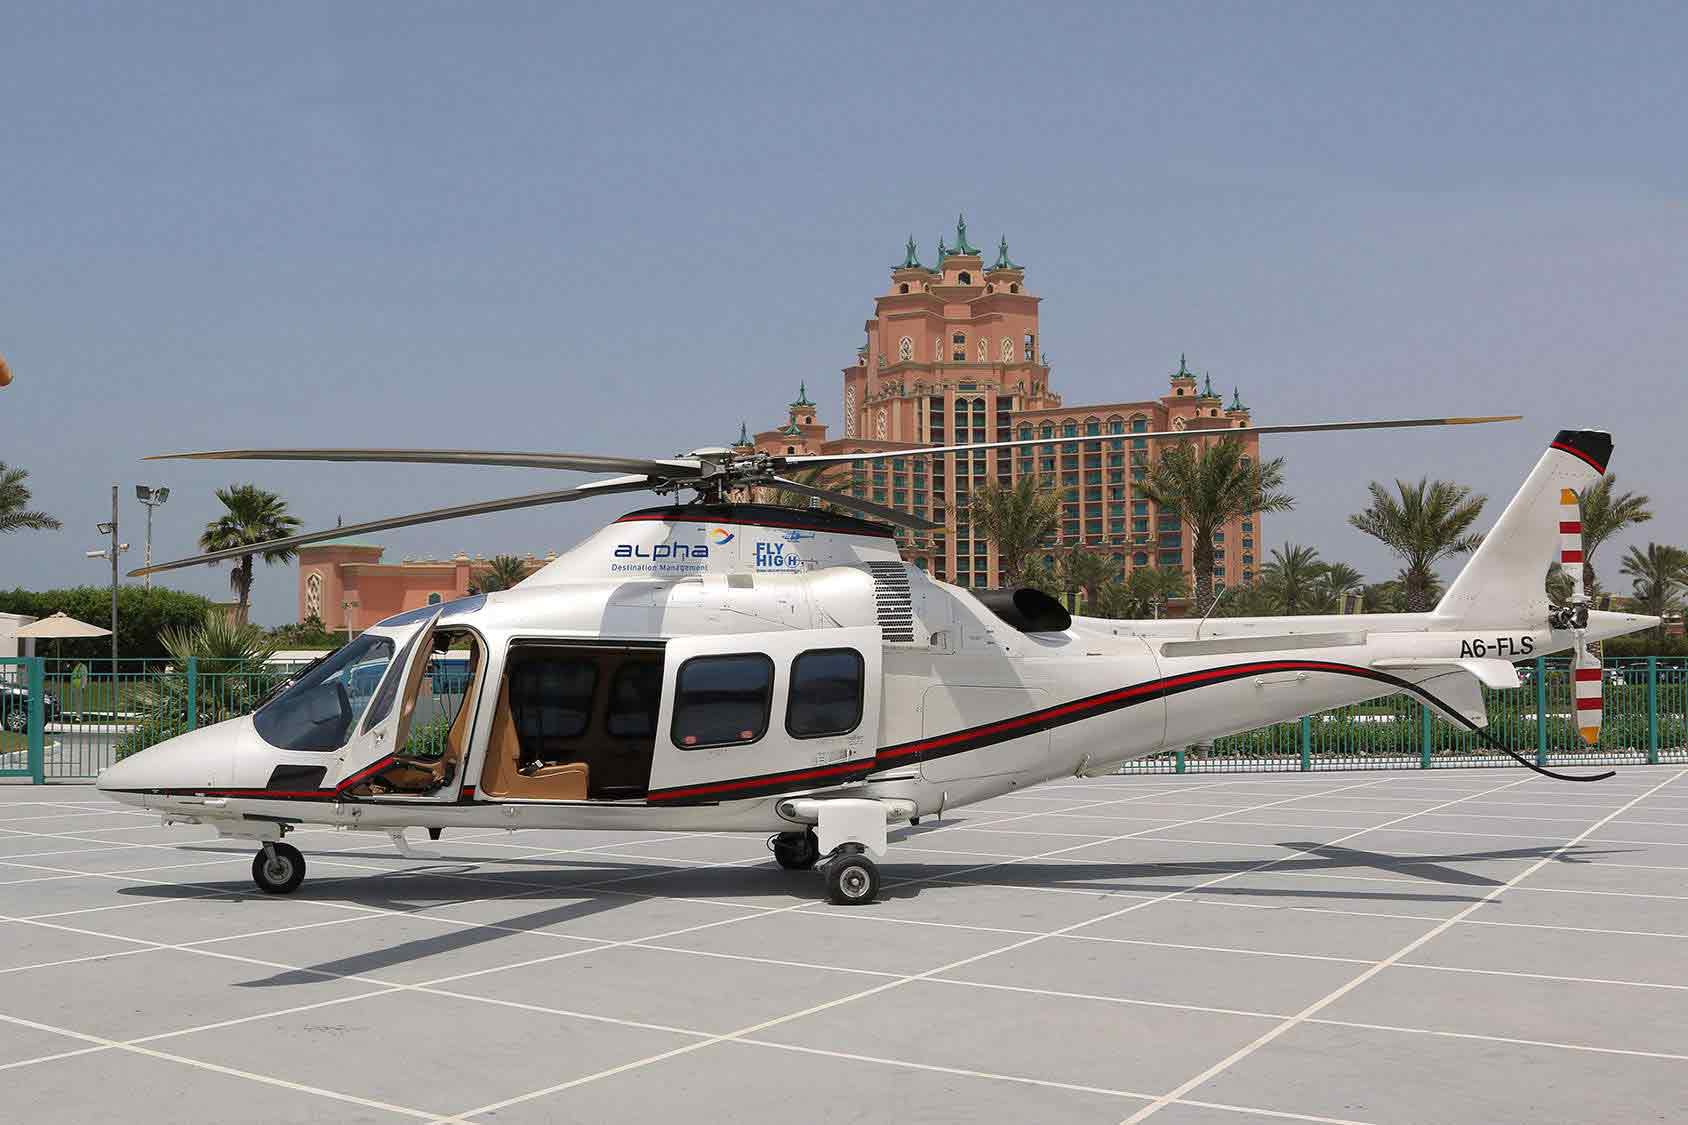 Best Things to do at Atlantis the Palm Dubai- A Luxurious Indulgence